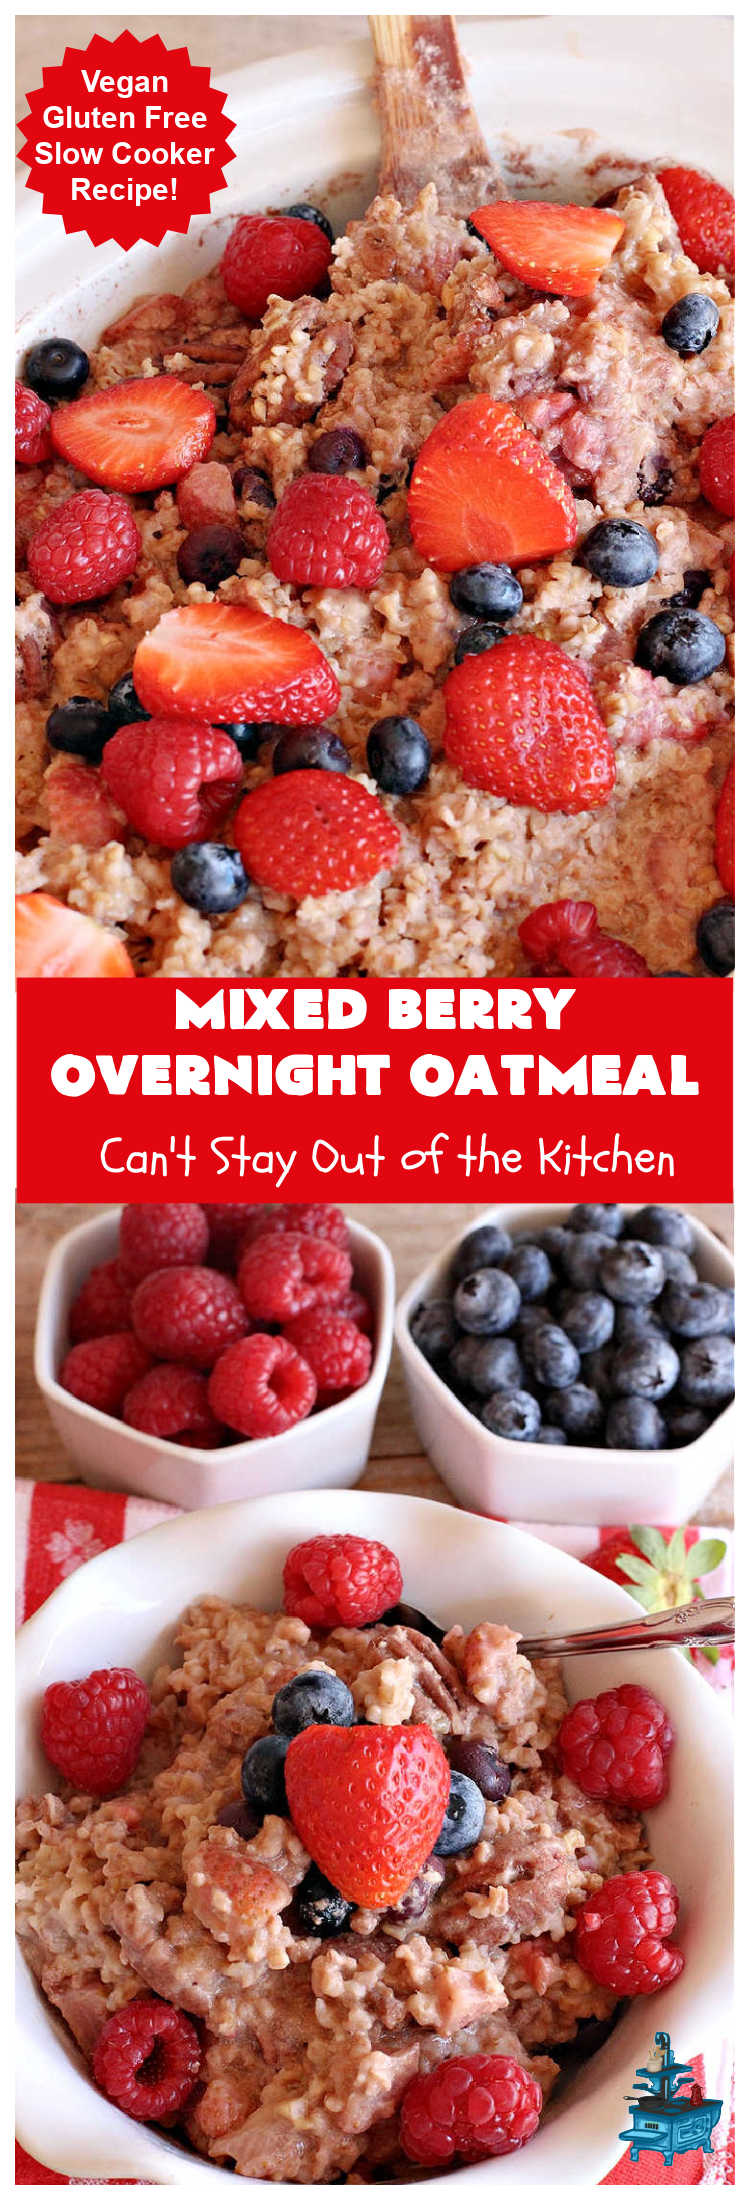 Mixed Berry Overnight Oatmeal | Can't Stay Out of the Kitchen | this delightful #oatmeal is filled with fresh #strawberries, #raspberries, #blueberries & #HoneyGlazedPecans. It's a fantastic way to enjoy #SteelCutOats & have a healthier #vegan, #GlutenFree #breakfast option. Make up in advance & microwave individual servings or make up for a weekend, #holiday or company breakfast. #oatmeal #OvernightOatmeal #HolidayBreakfast #MixedBerries #pecans #MixedBerryOvernightOatmeal #crockpot #SlowCooker #SlowCookerBreakfast